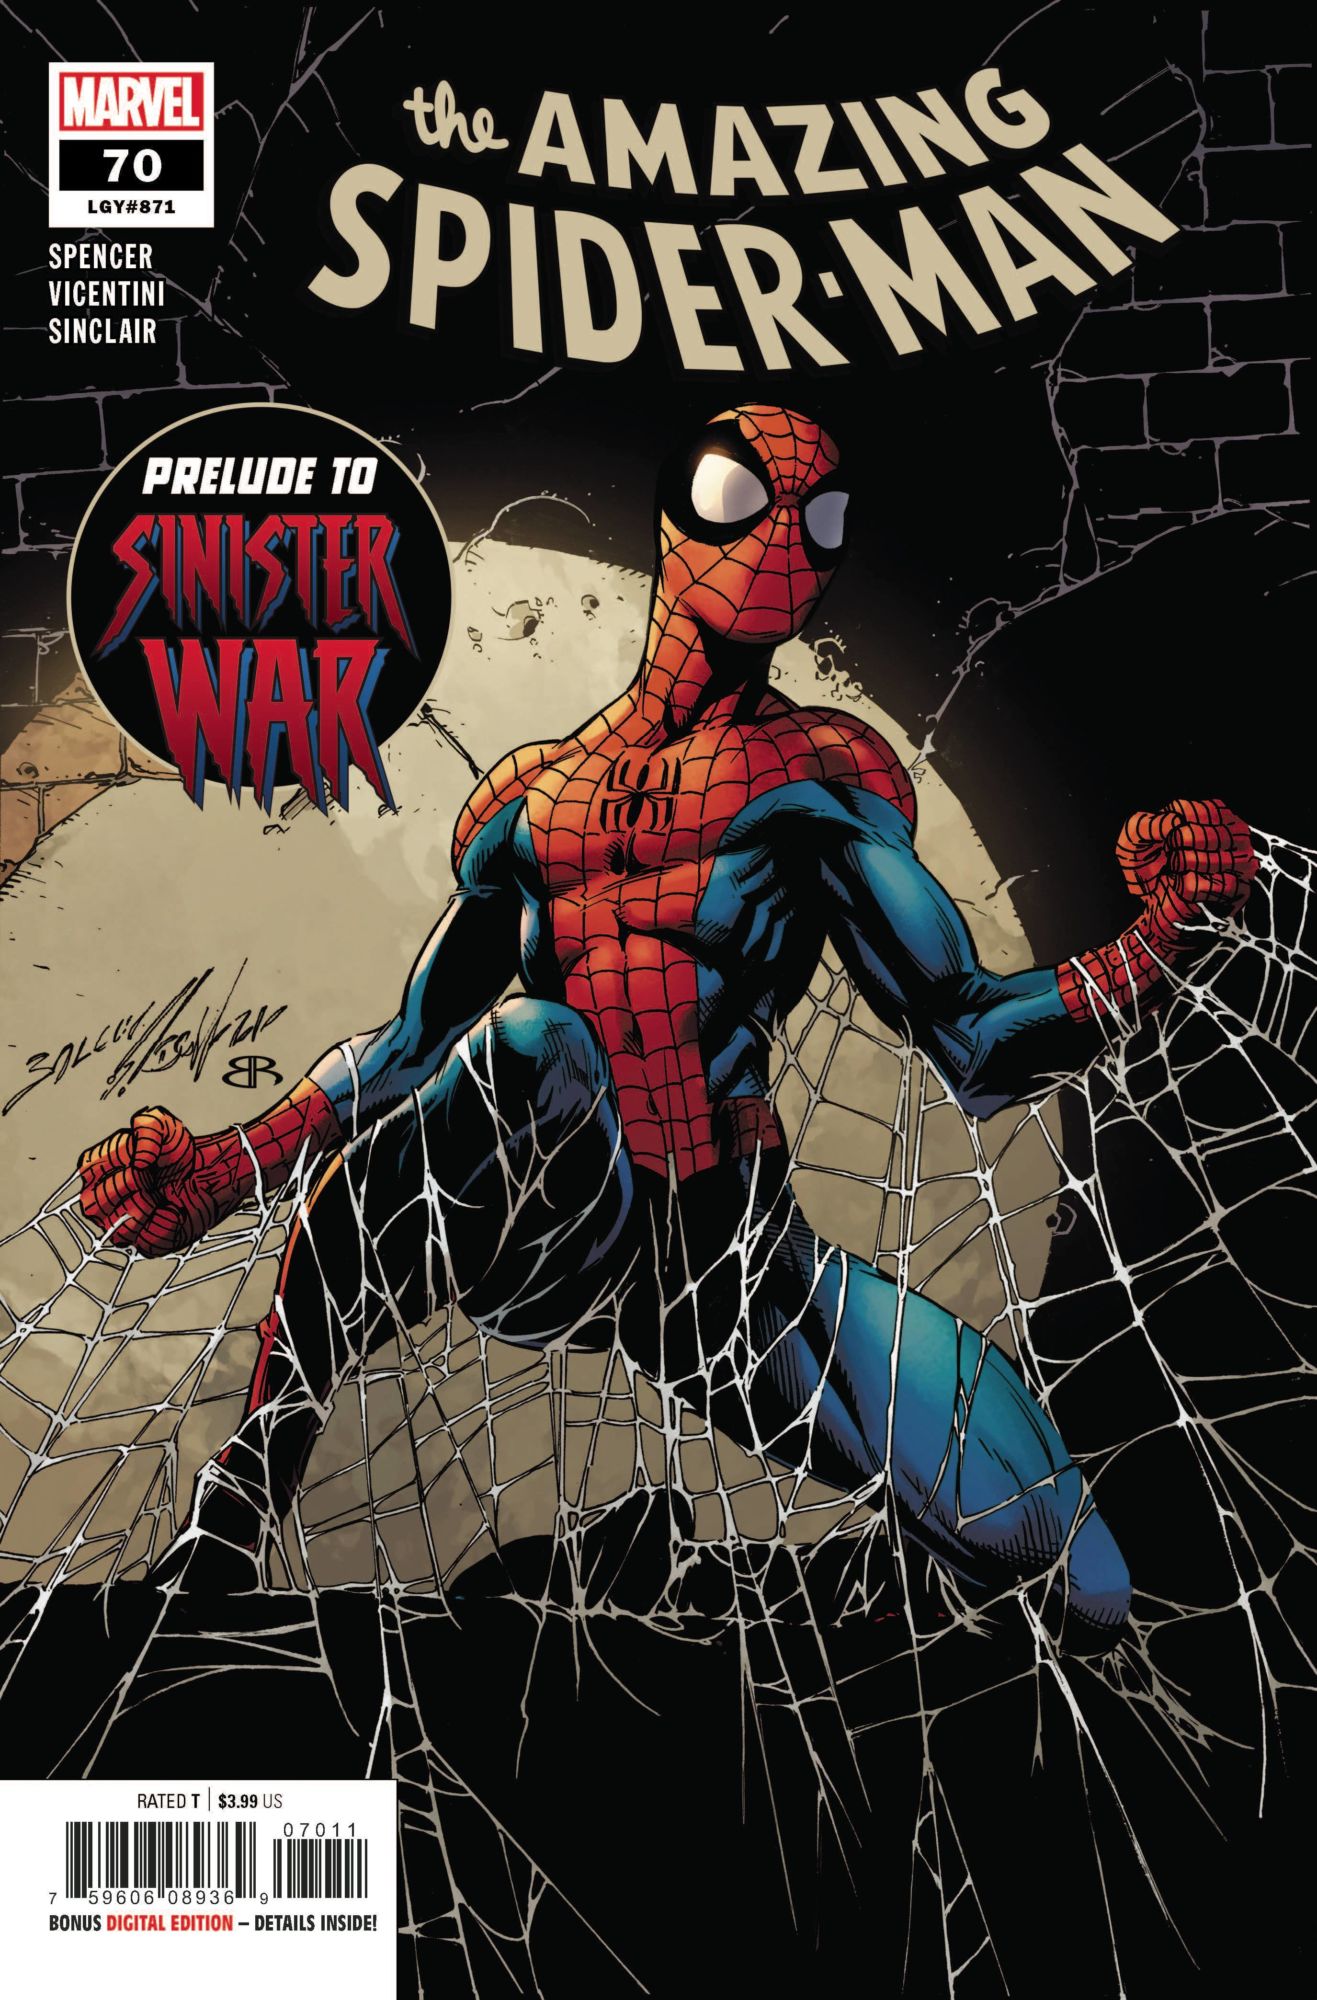 Marvels Spidey and his Amazing Friends Series to Premiere August 6   Marvel